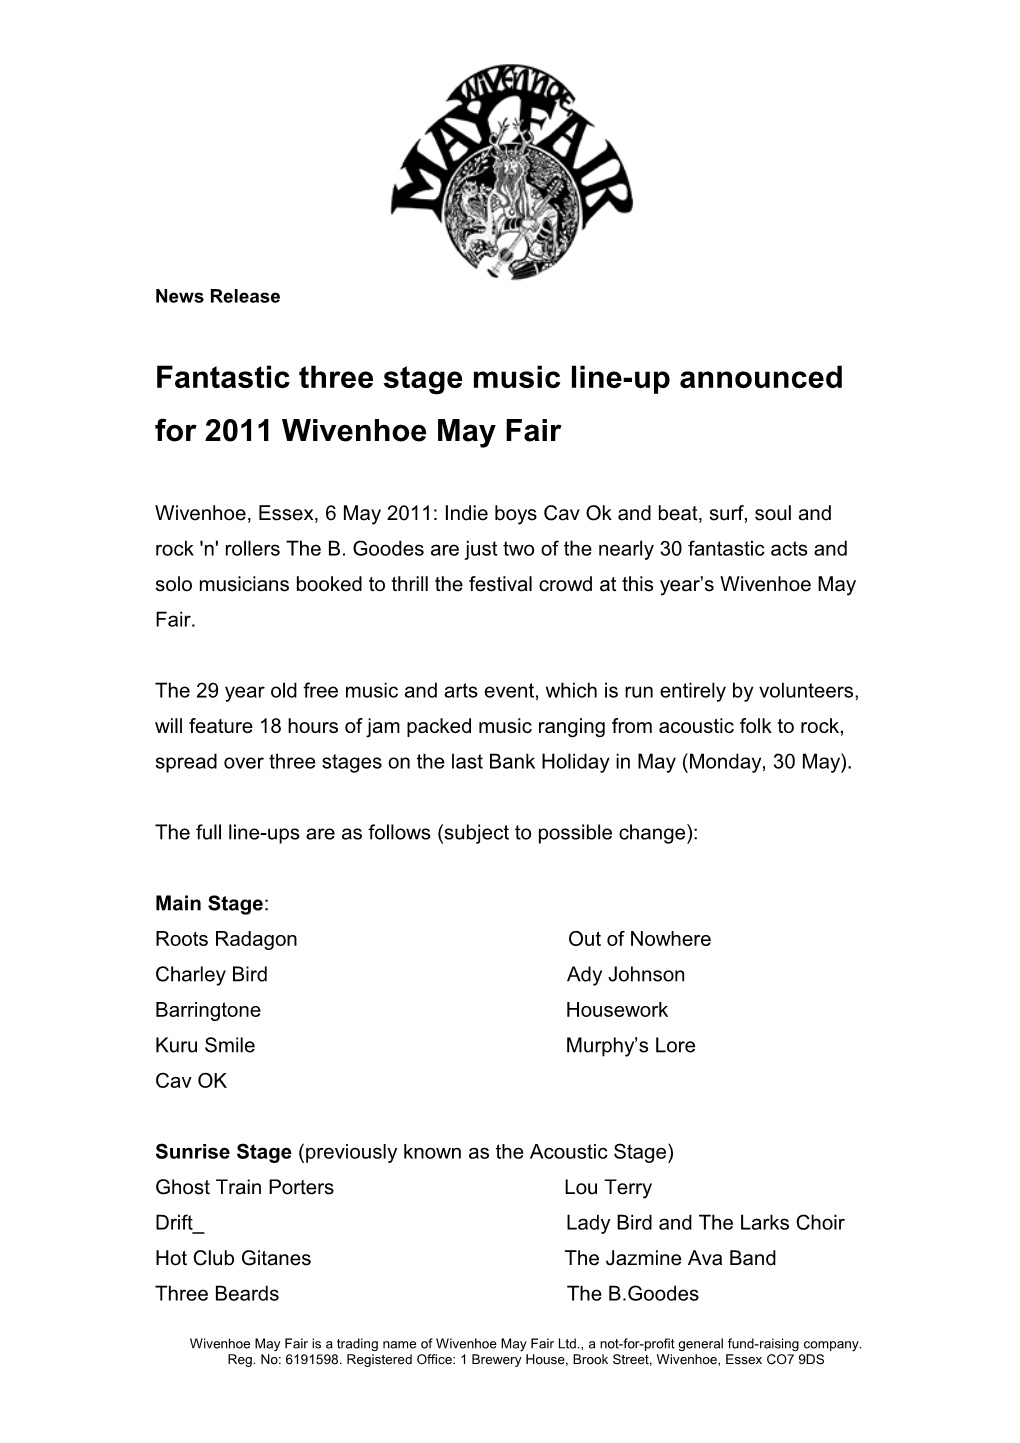 Fantastic Three Stage Music Line-Up Announced for 2011 Wivenhoe May Fair